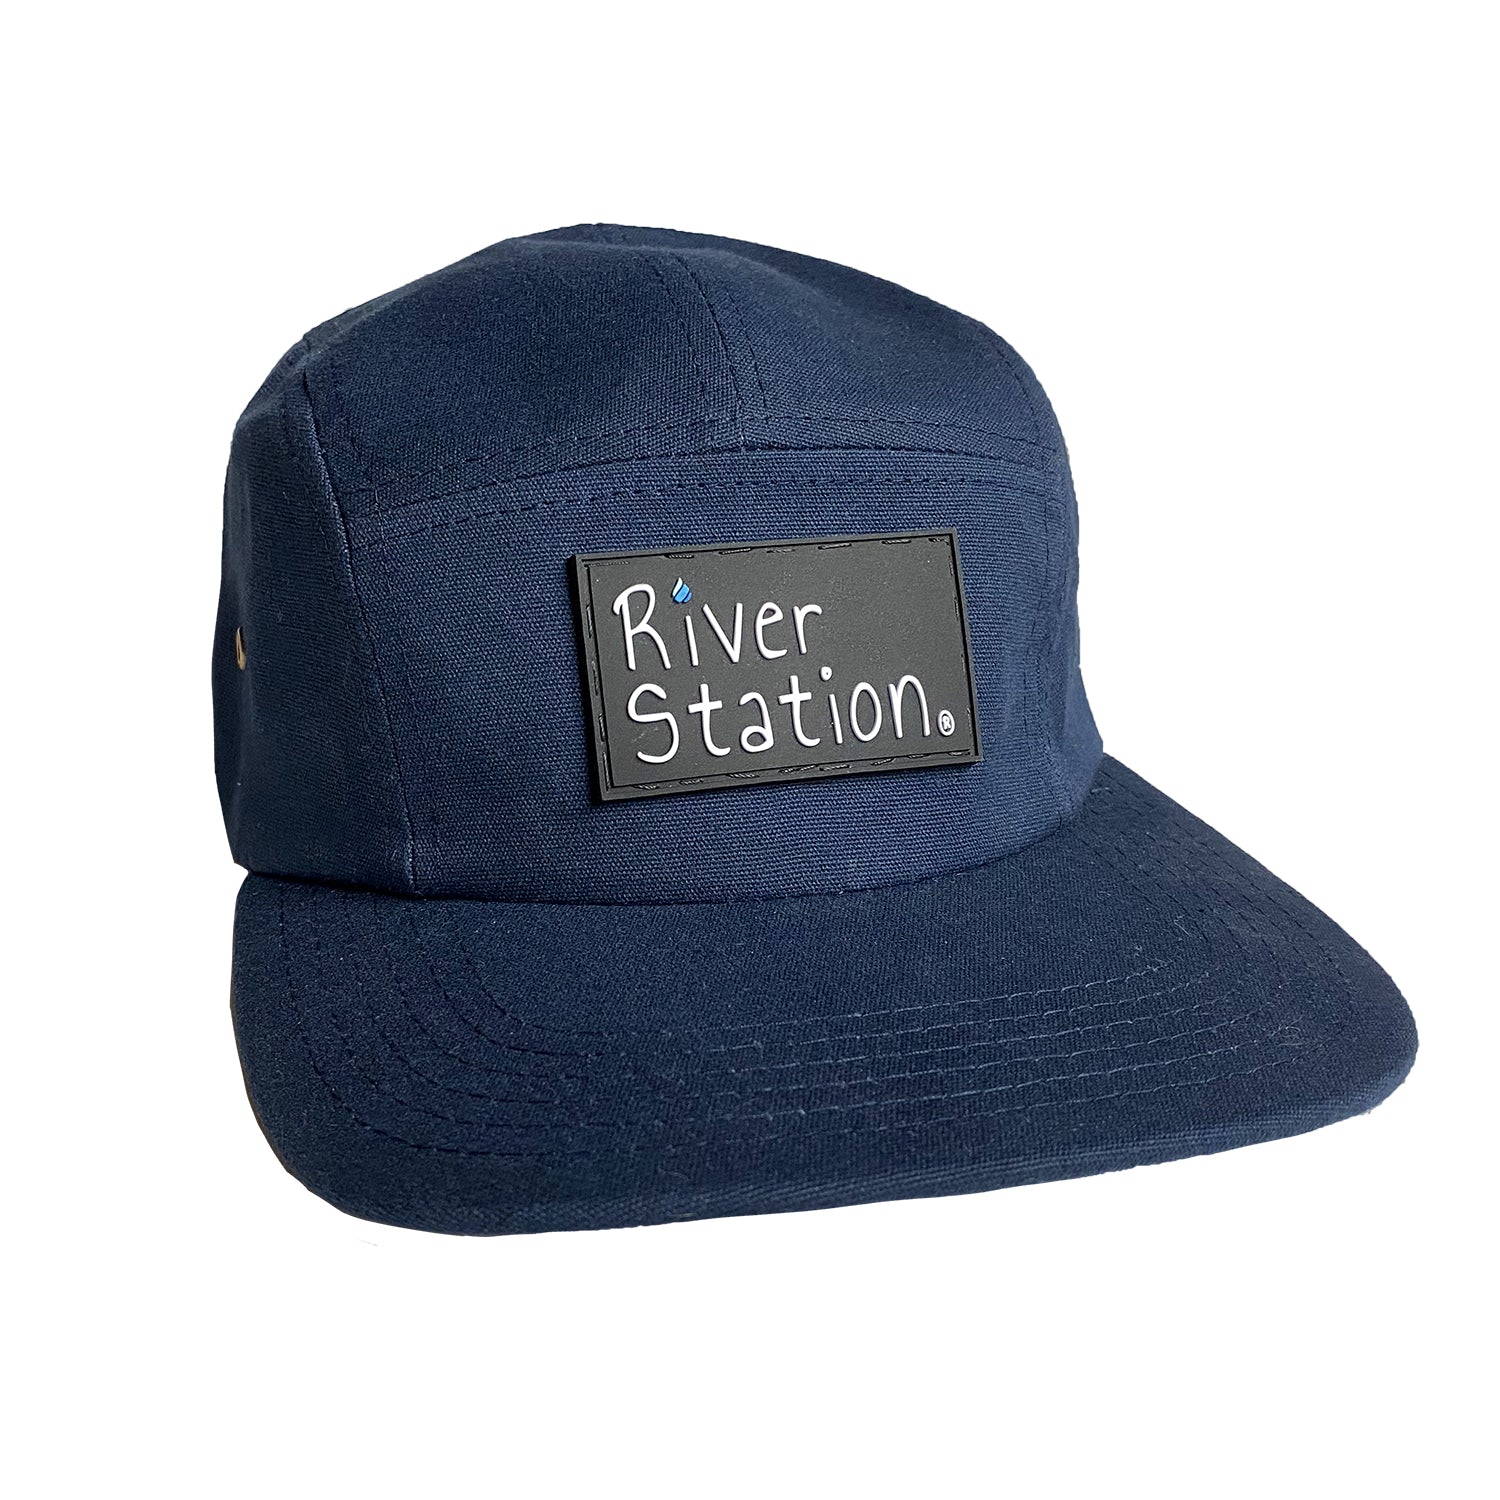 Navy River Station whitewater hat.